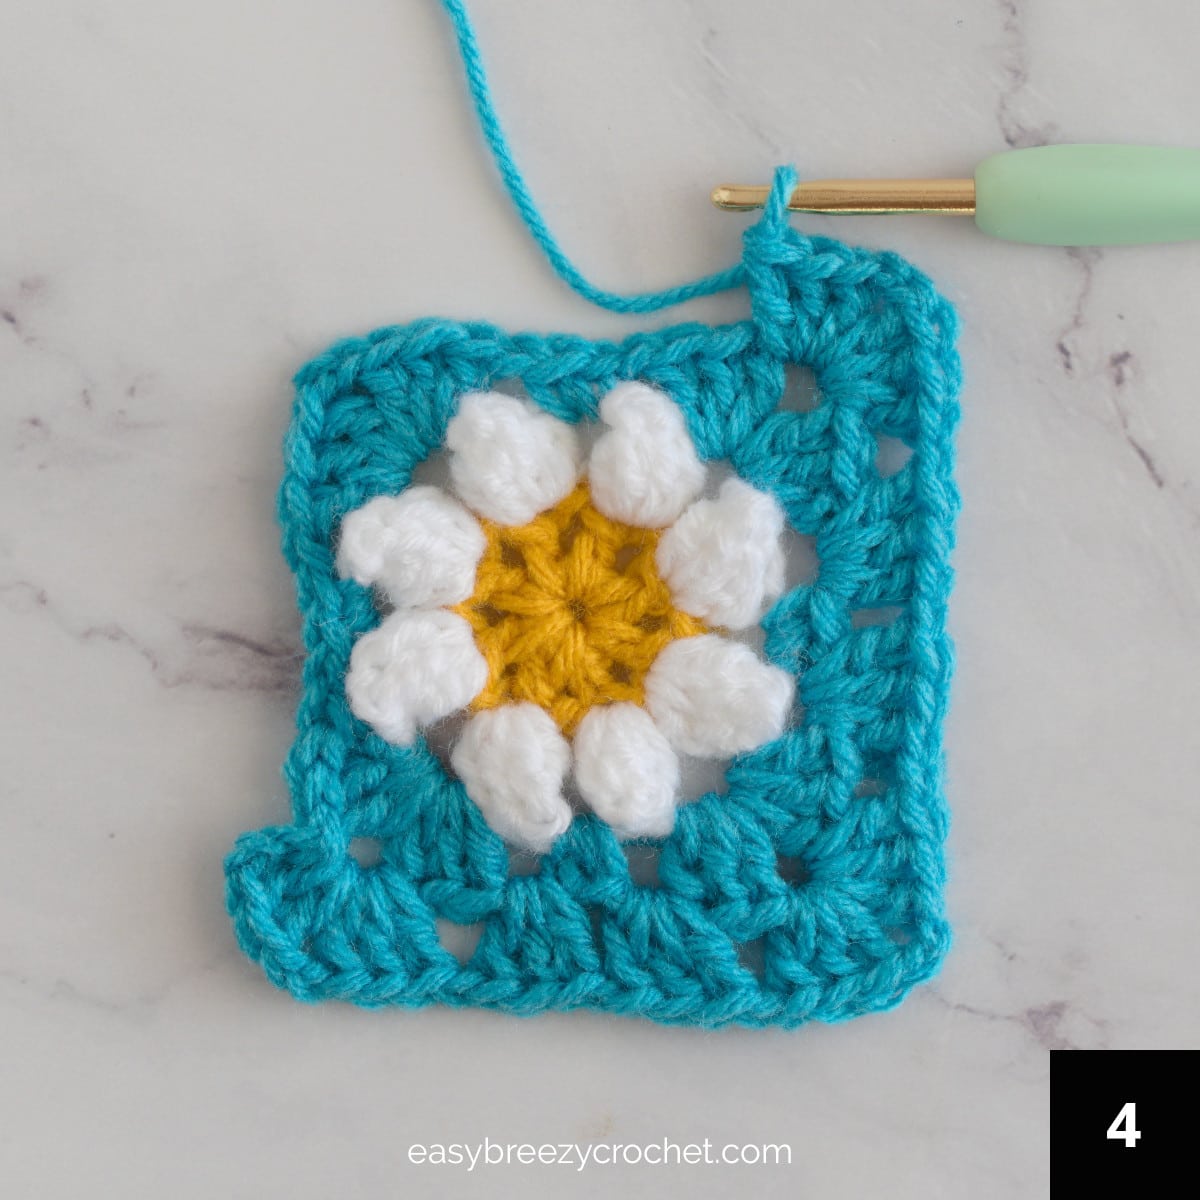 A partially compete blue crochet granny square with a white flower.